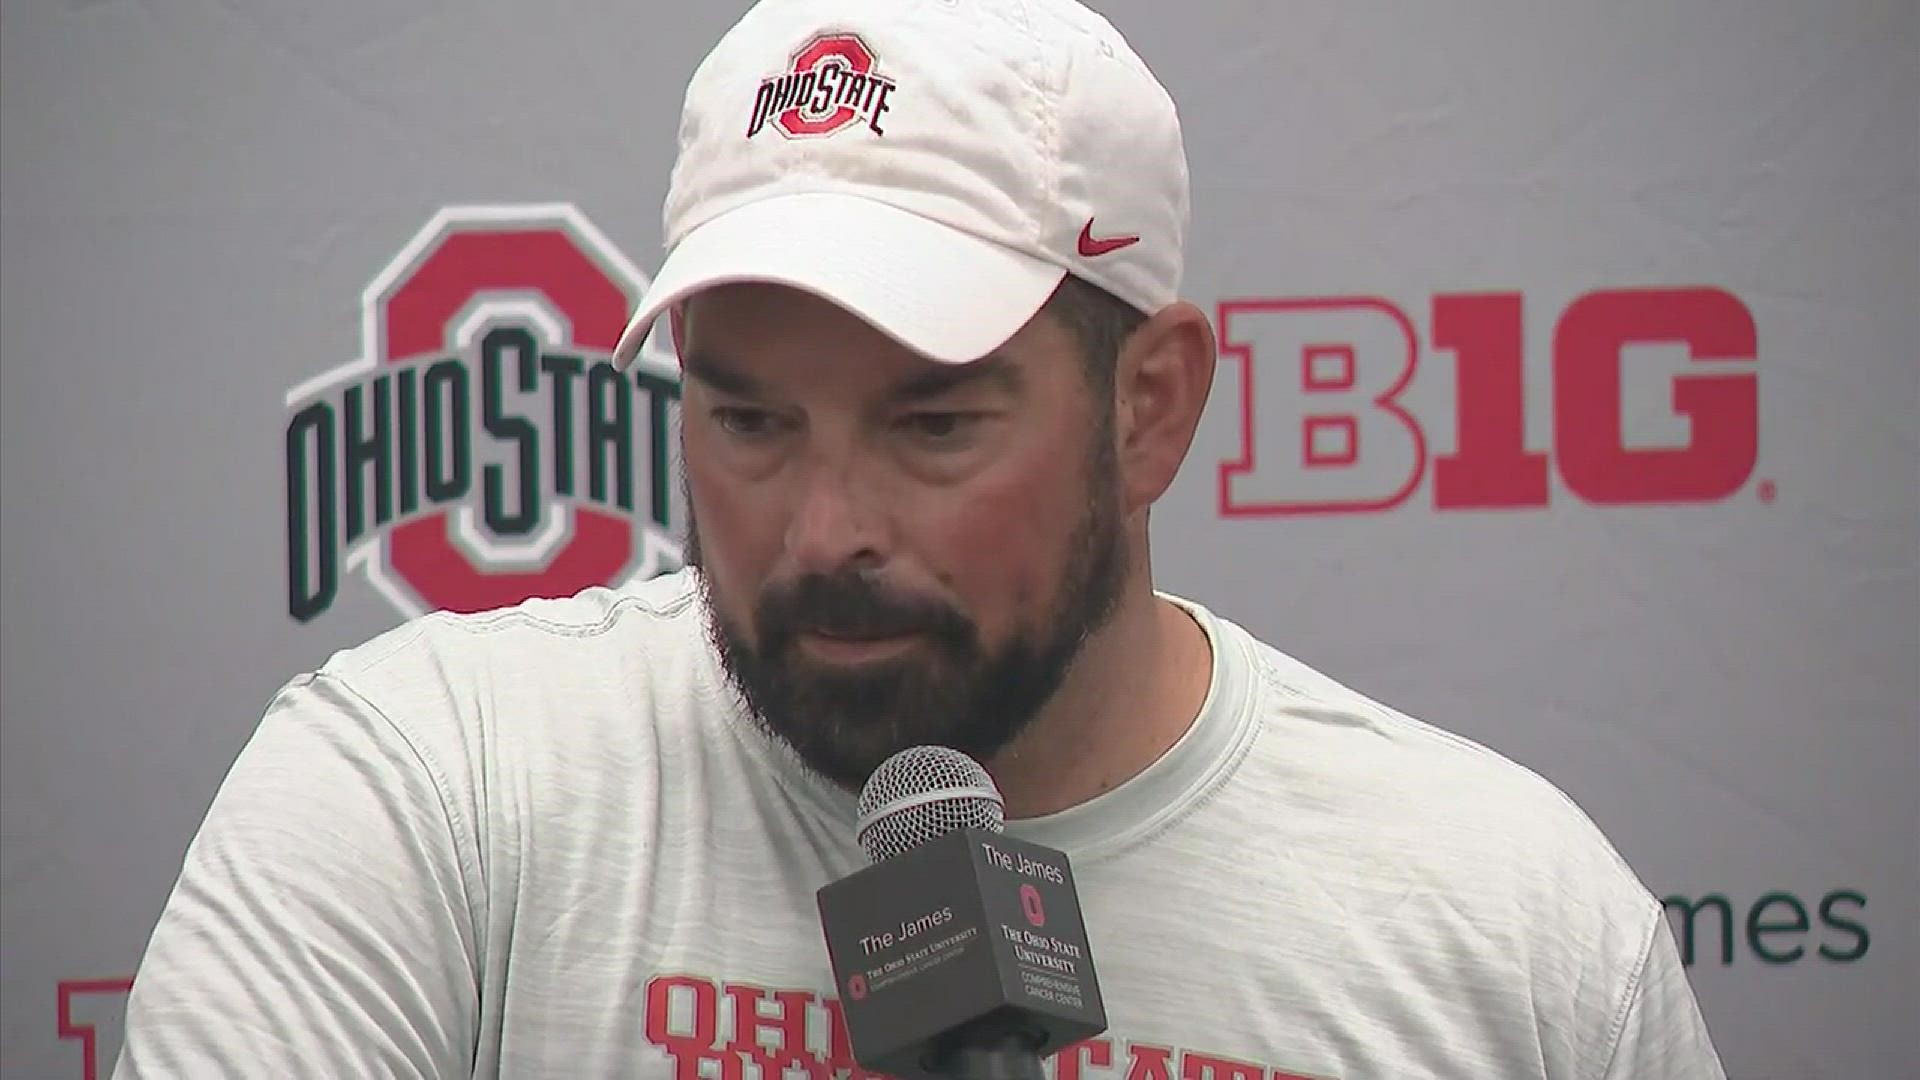 Ohio State will have 25 practices leading up to the start of the season when they host Notre Dame on Sept. 3.